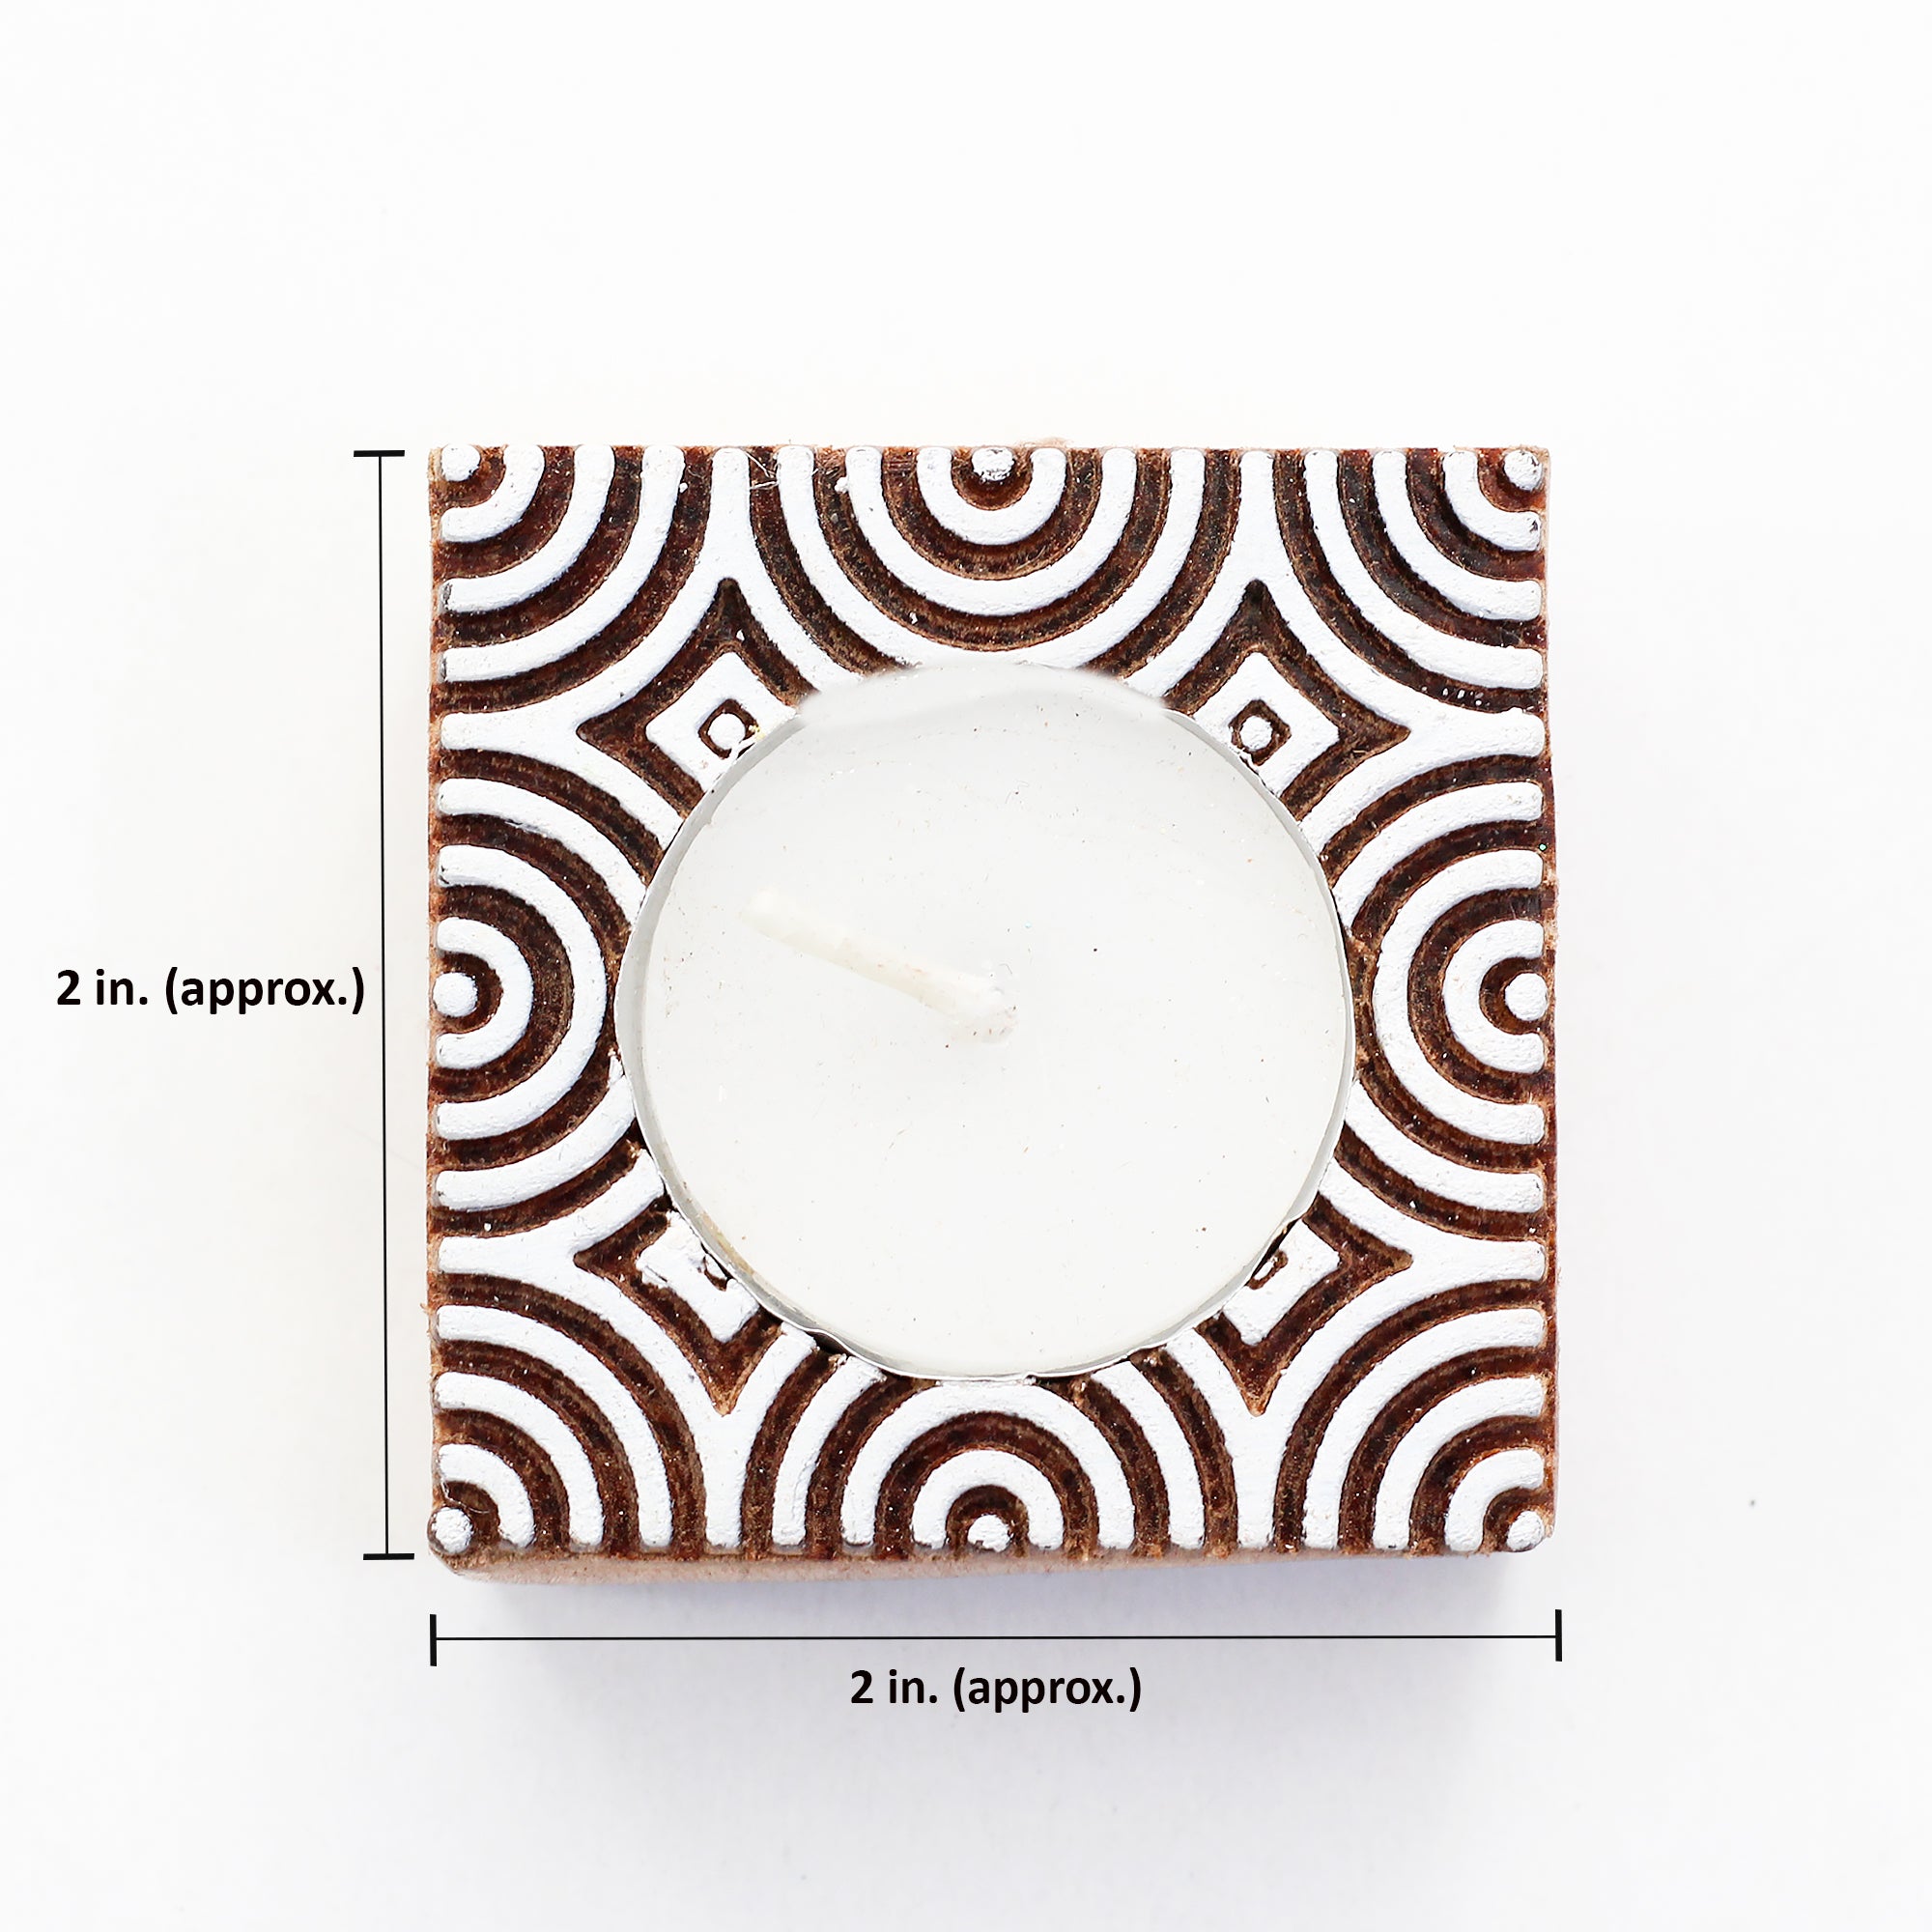 Wooden Printing Block & Candle Holder- Concentric Circles